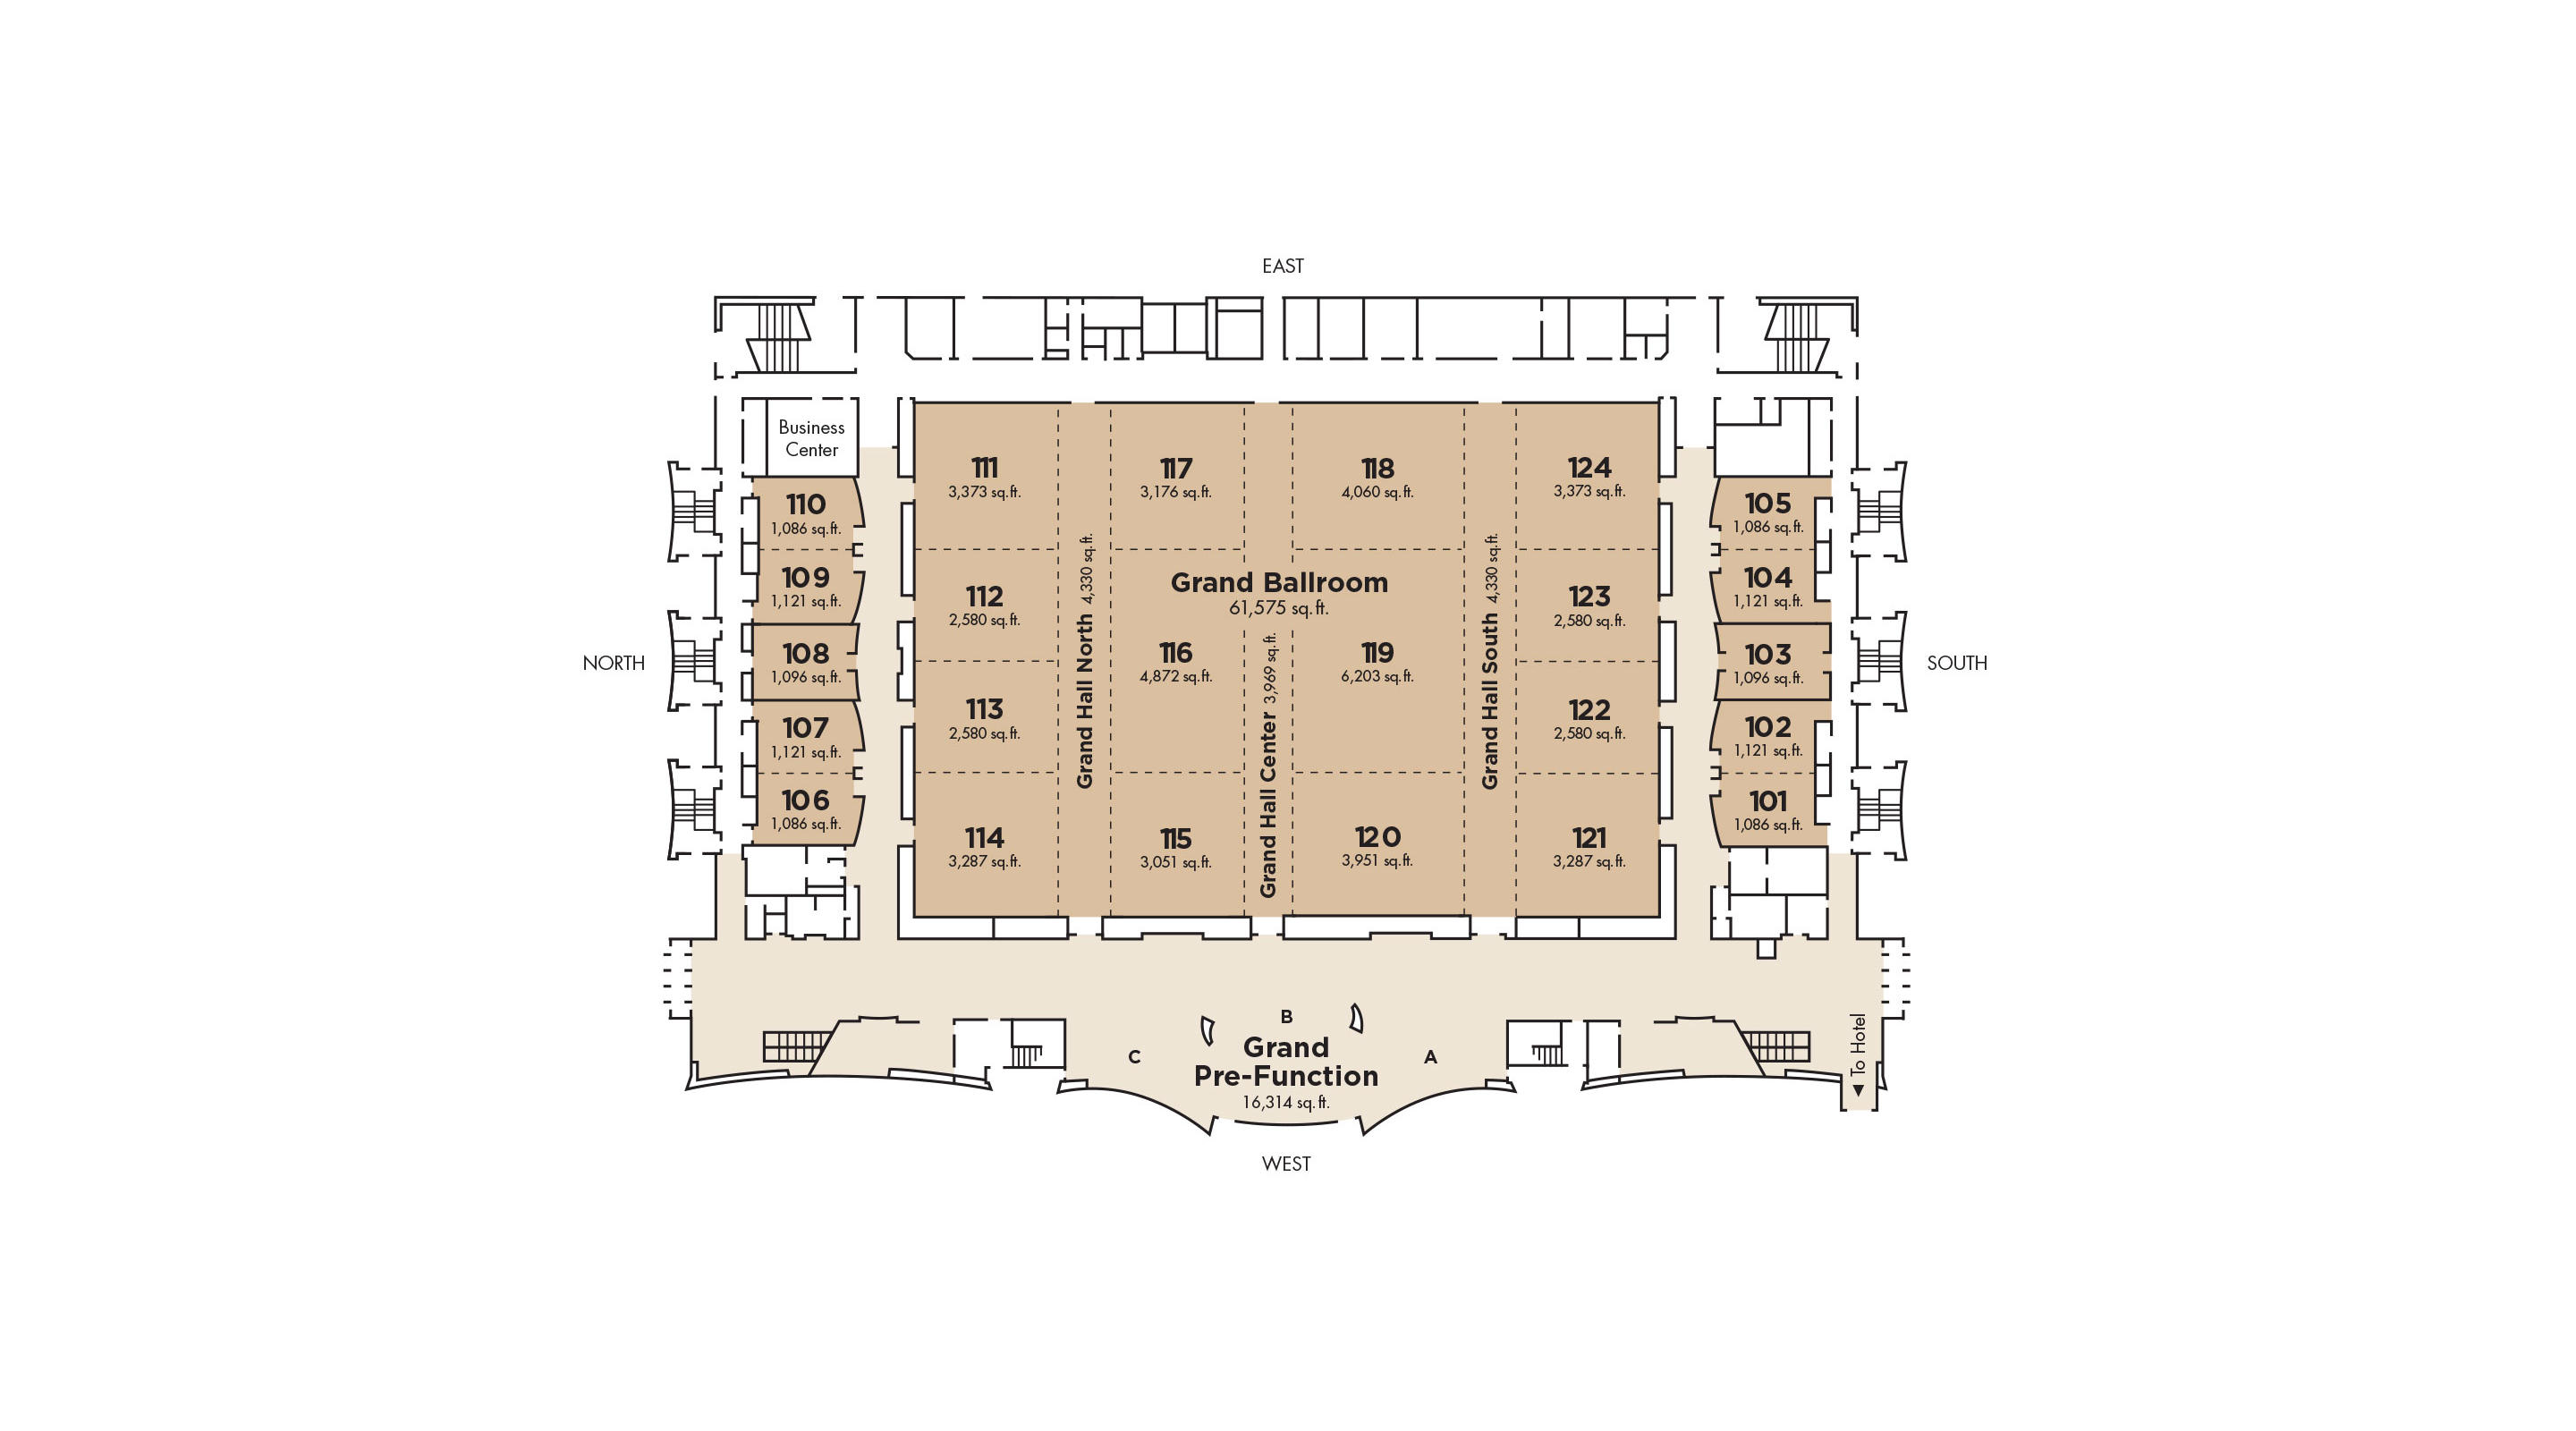 Mgm Grand Conference Center Seating Chart